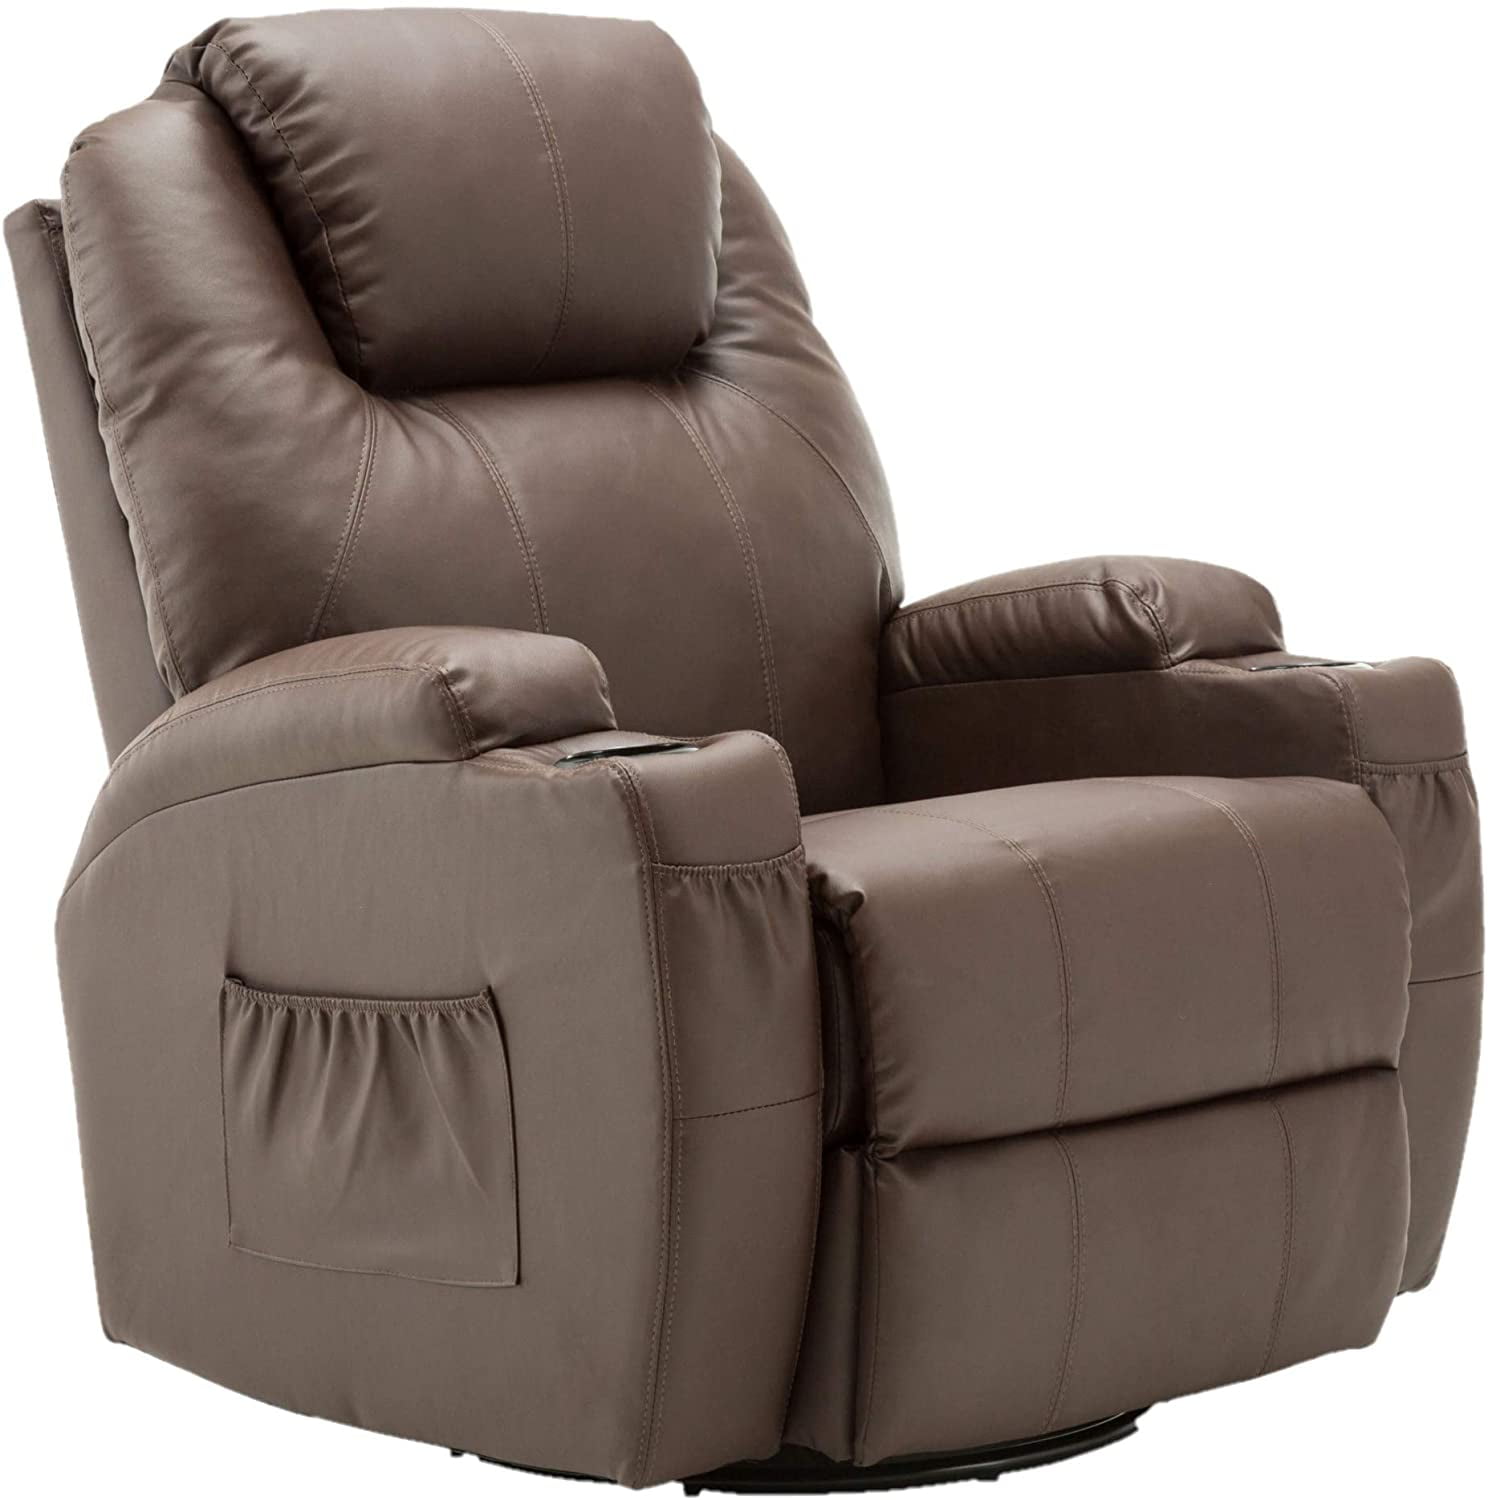 Mcombo Faux Leather Recliner Brown, Leather Reclining Swivel Chair